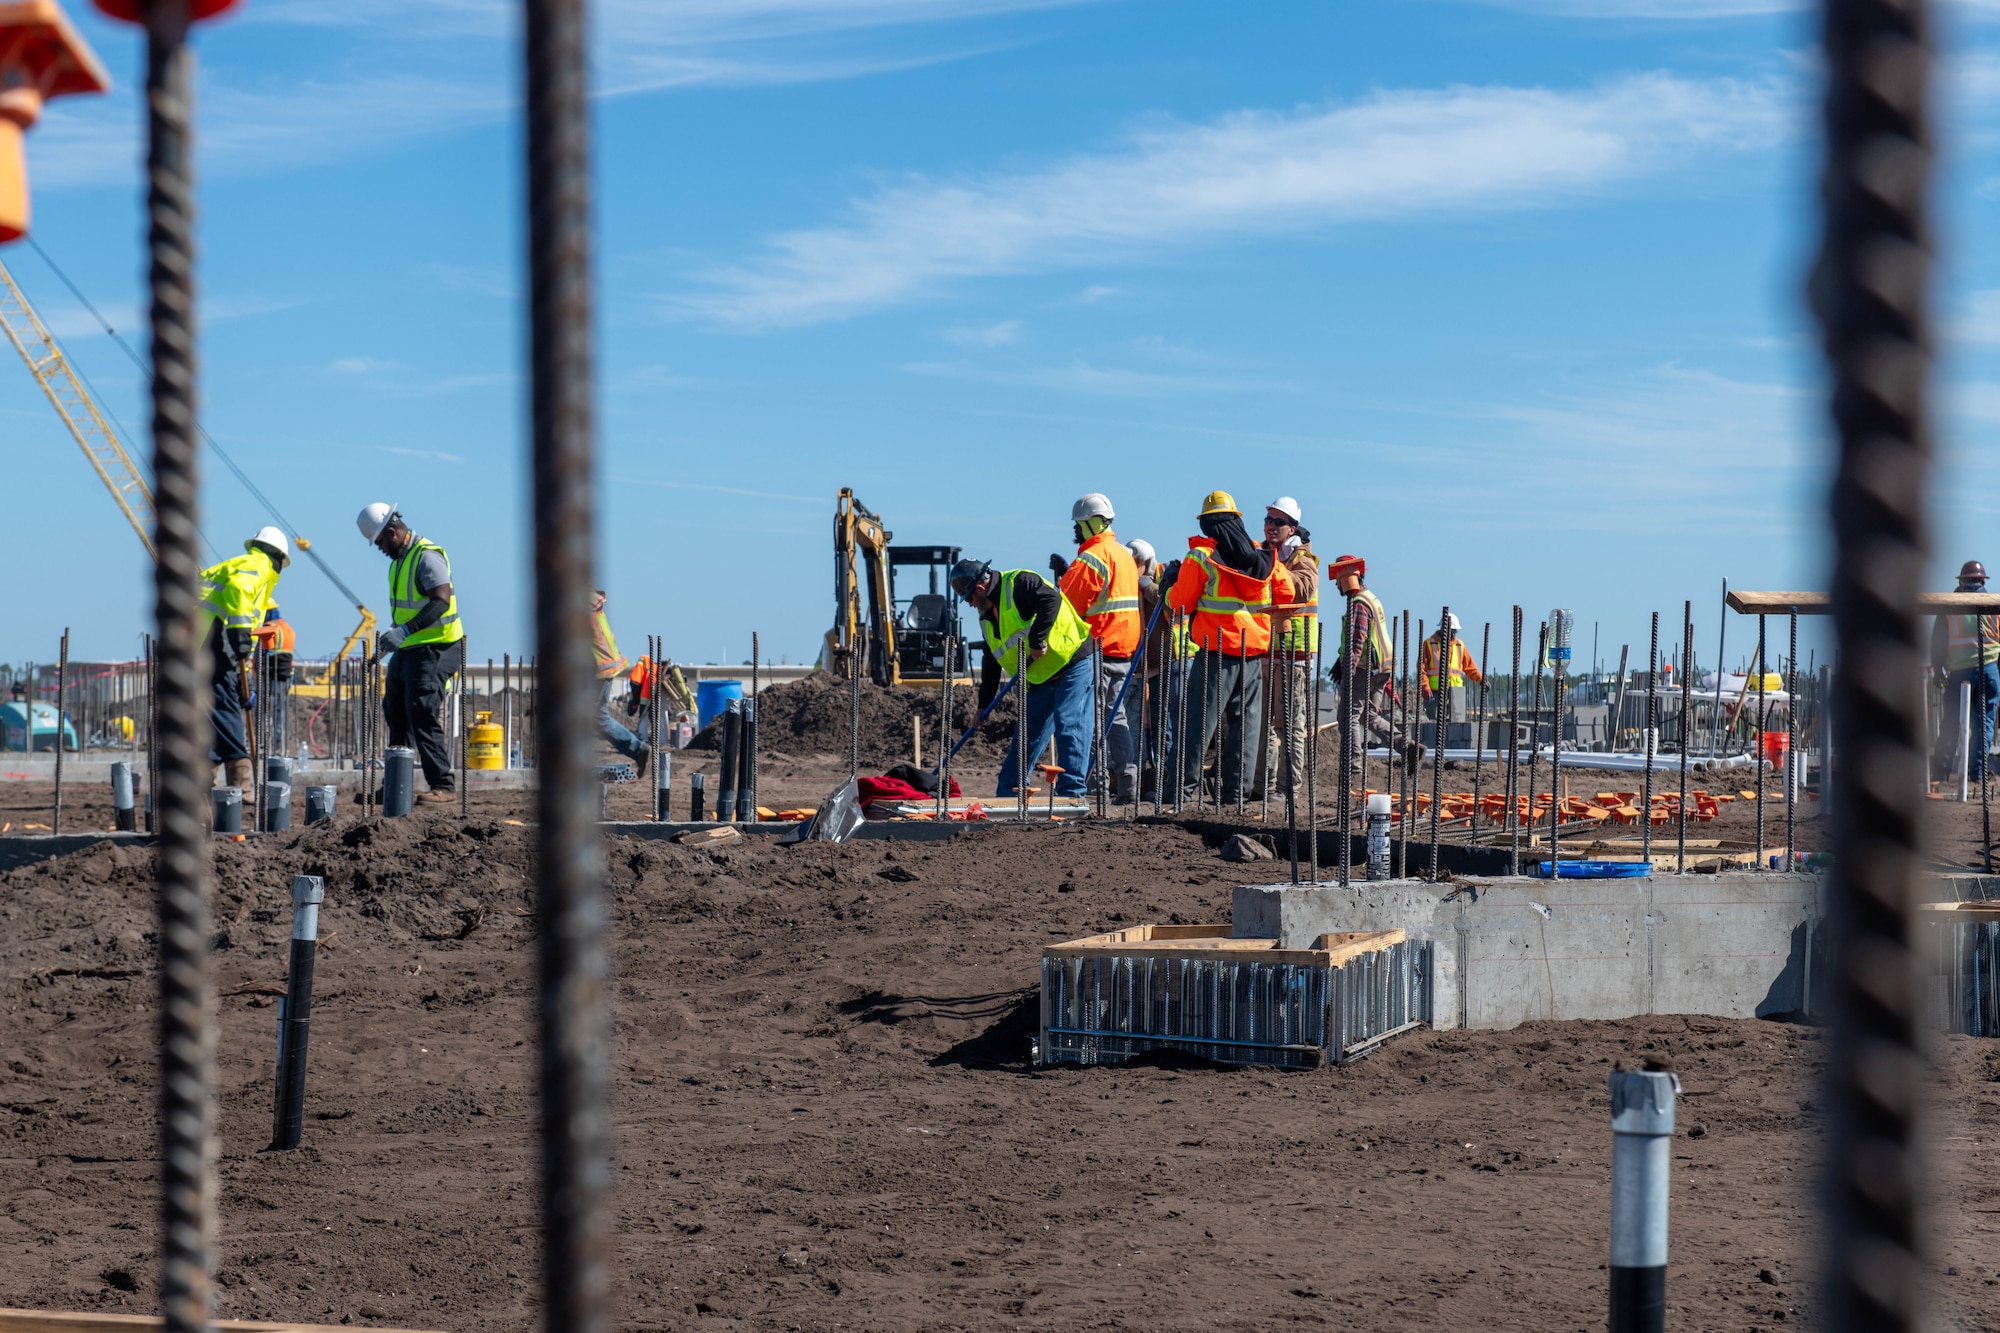 A group of construction workers can be seen working on a construction site.